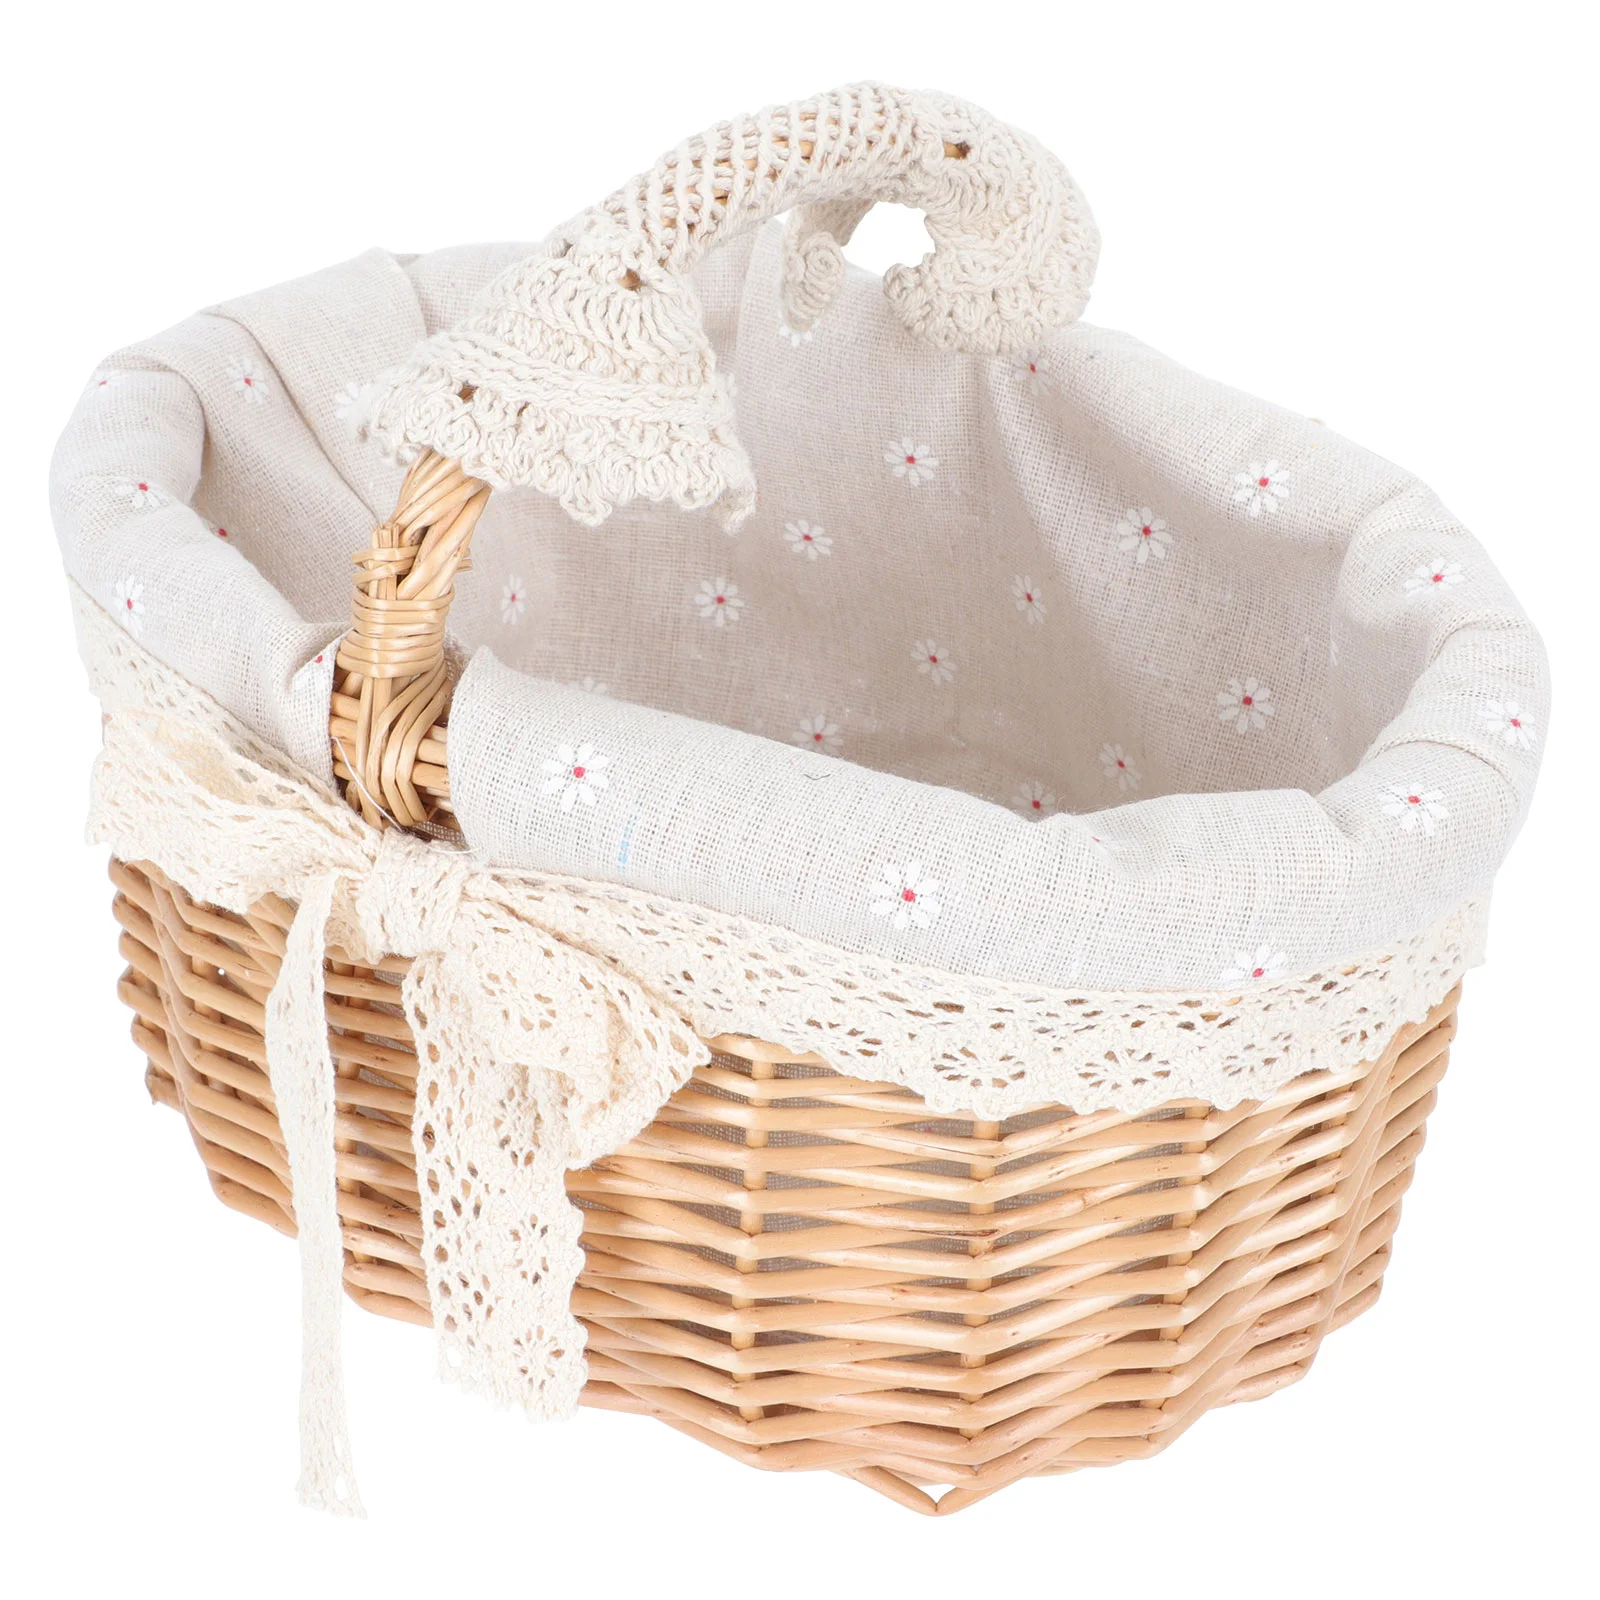 

Picnic Basket Liner Rattan Wicker Bucket Woven Baskets Storage Lid Braided Flower Gift Go Food Containers Lids Farmhouse